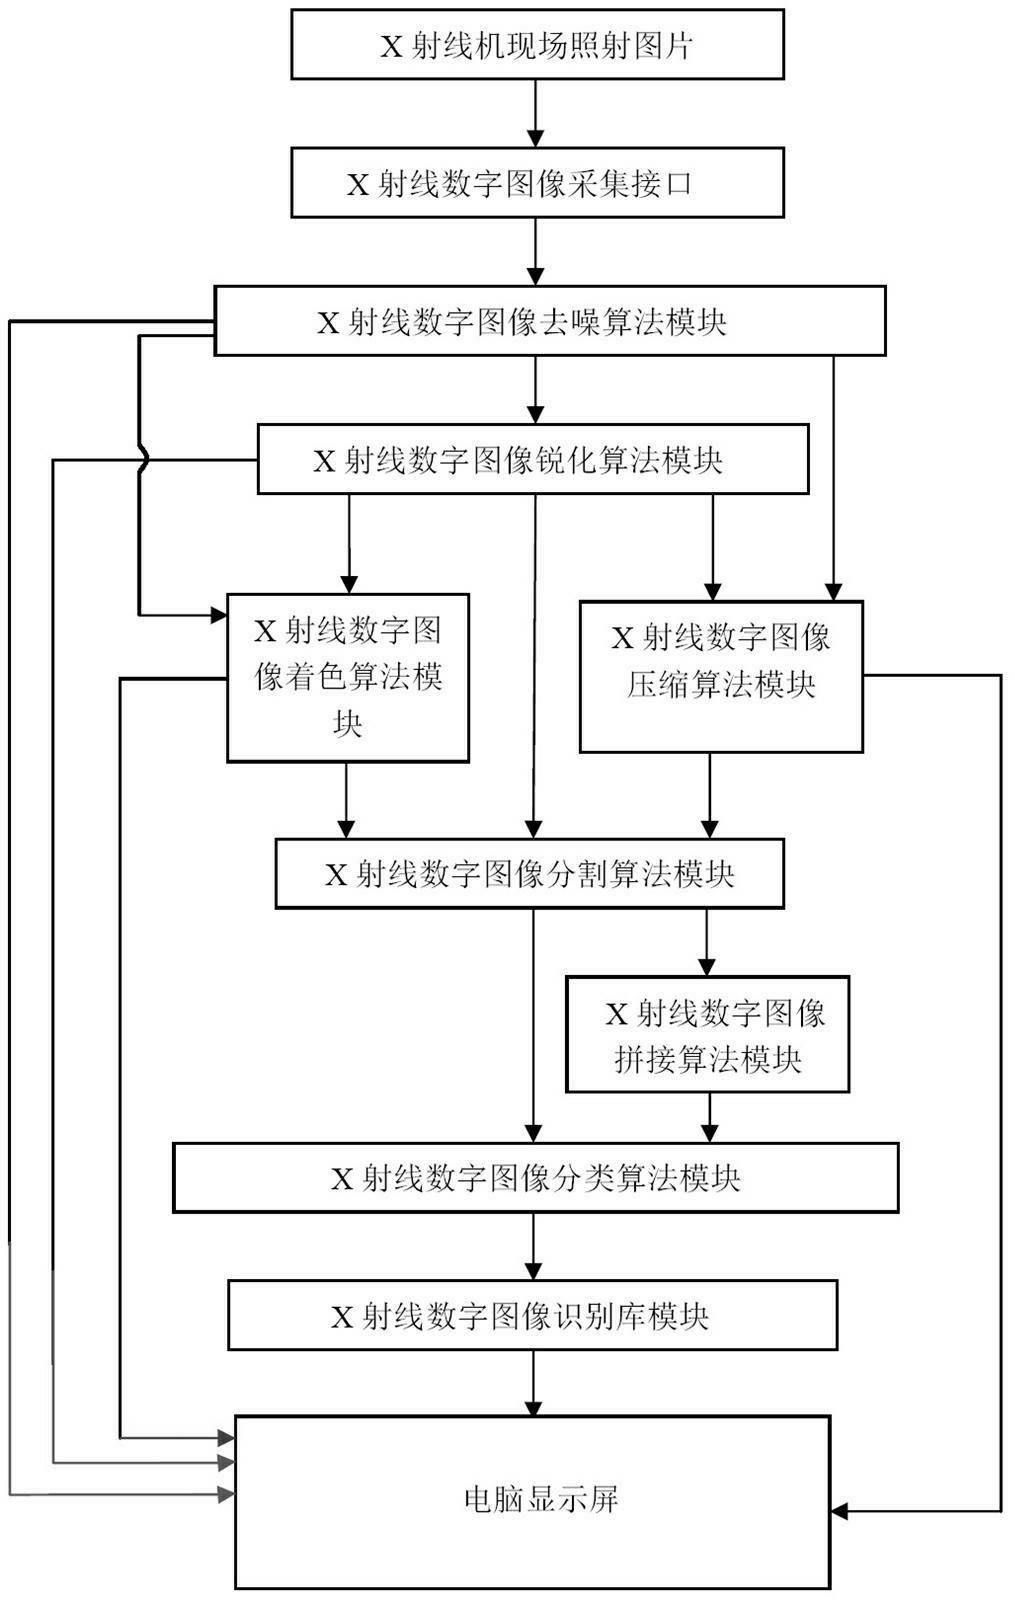 Electrical equipment X ray digital image processing algorithm support system